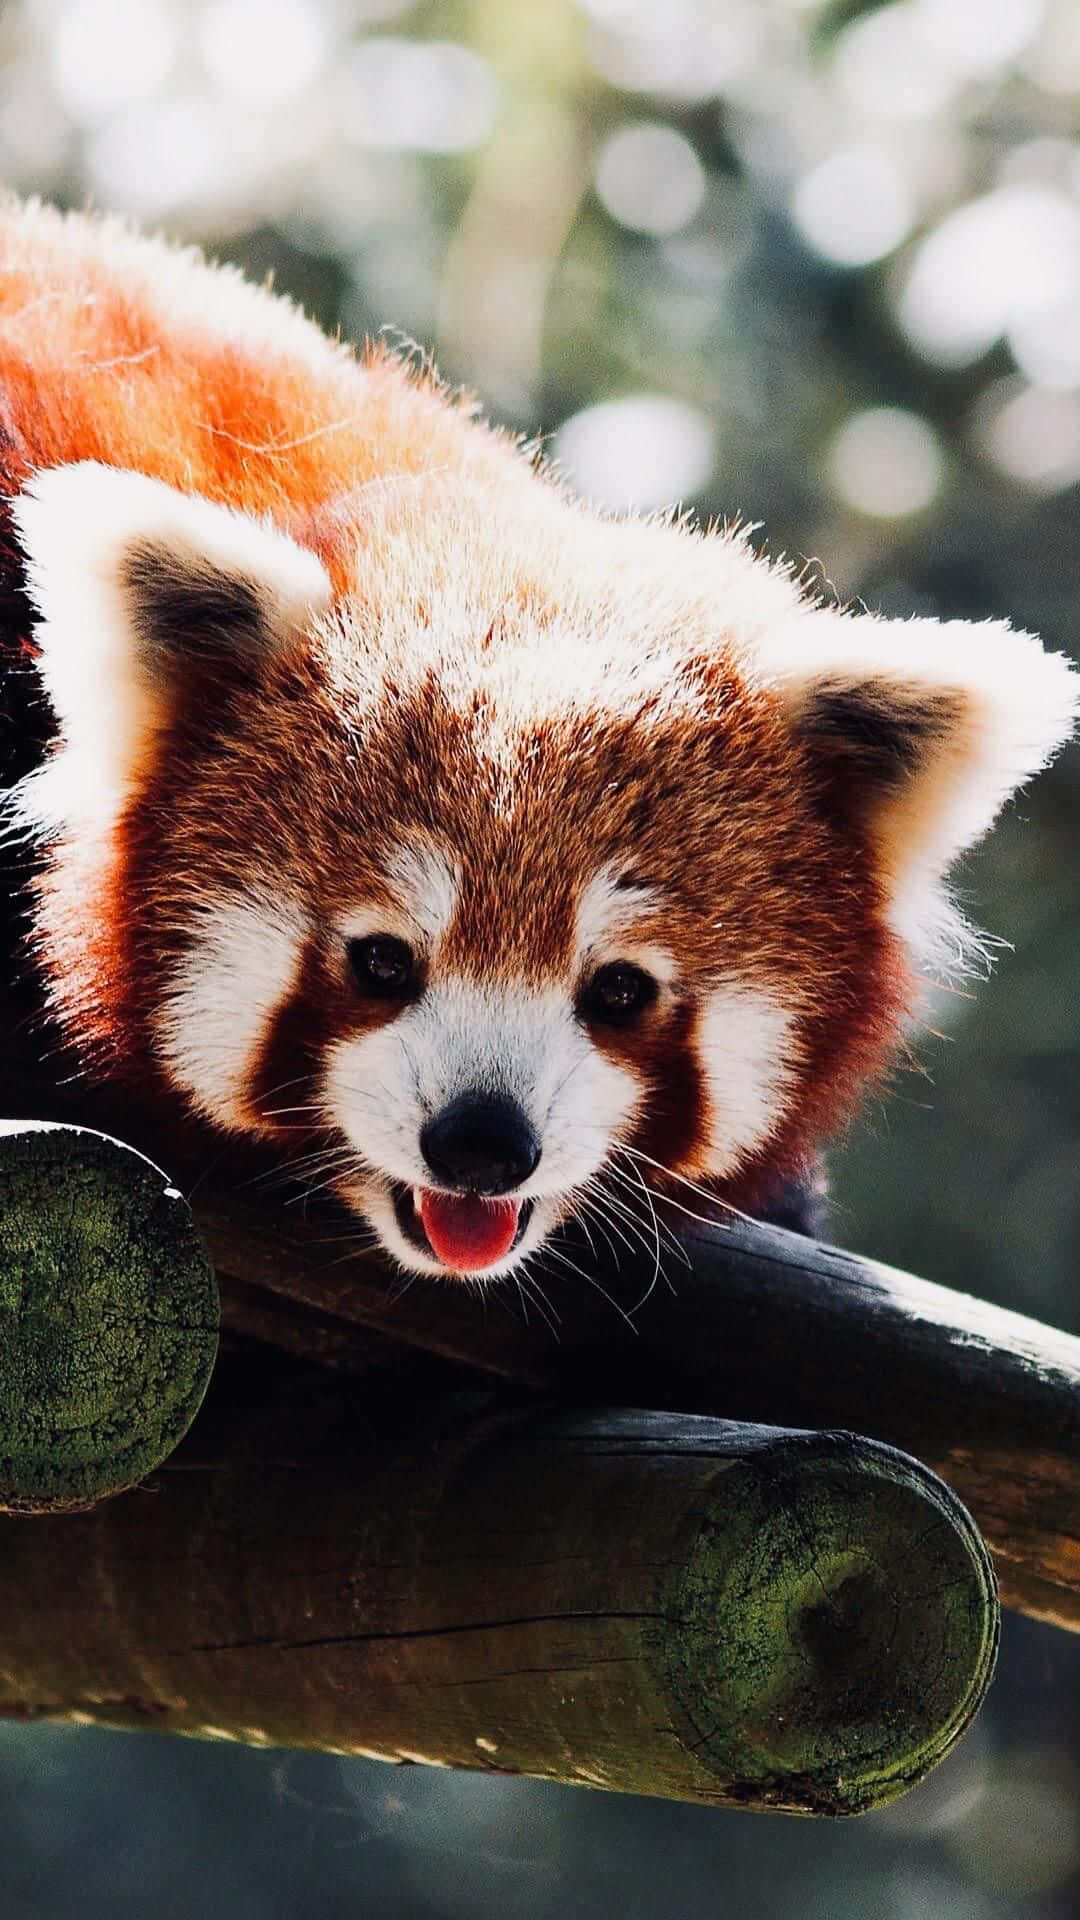 The Adorable Red Panda